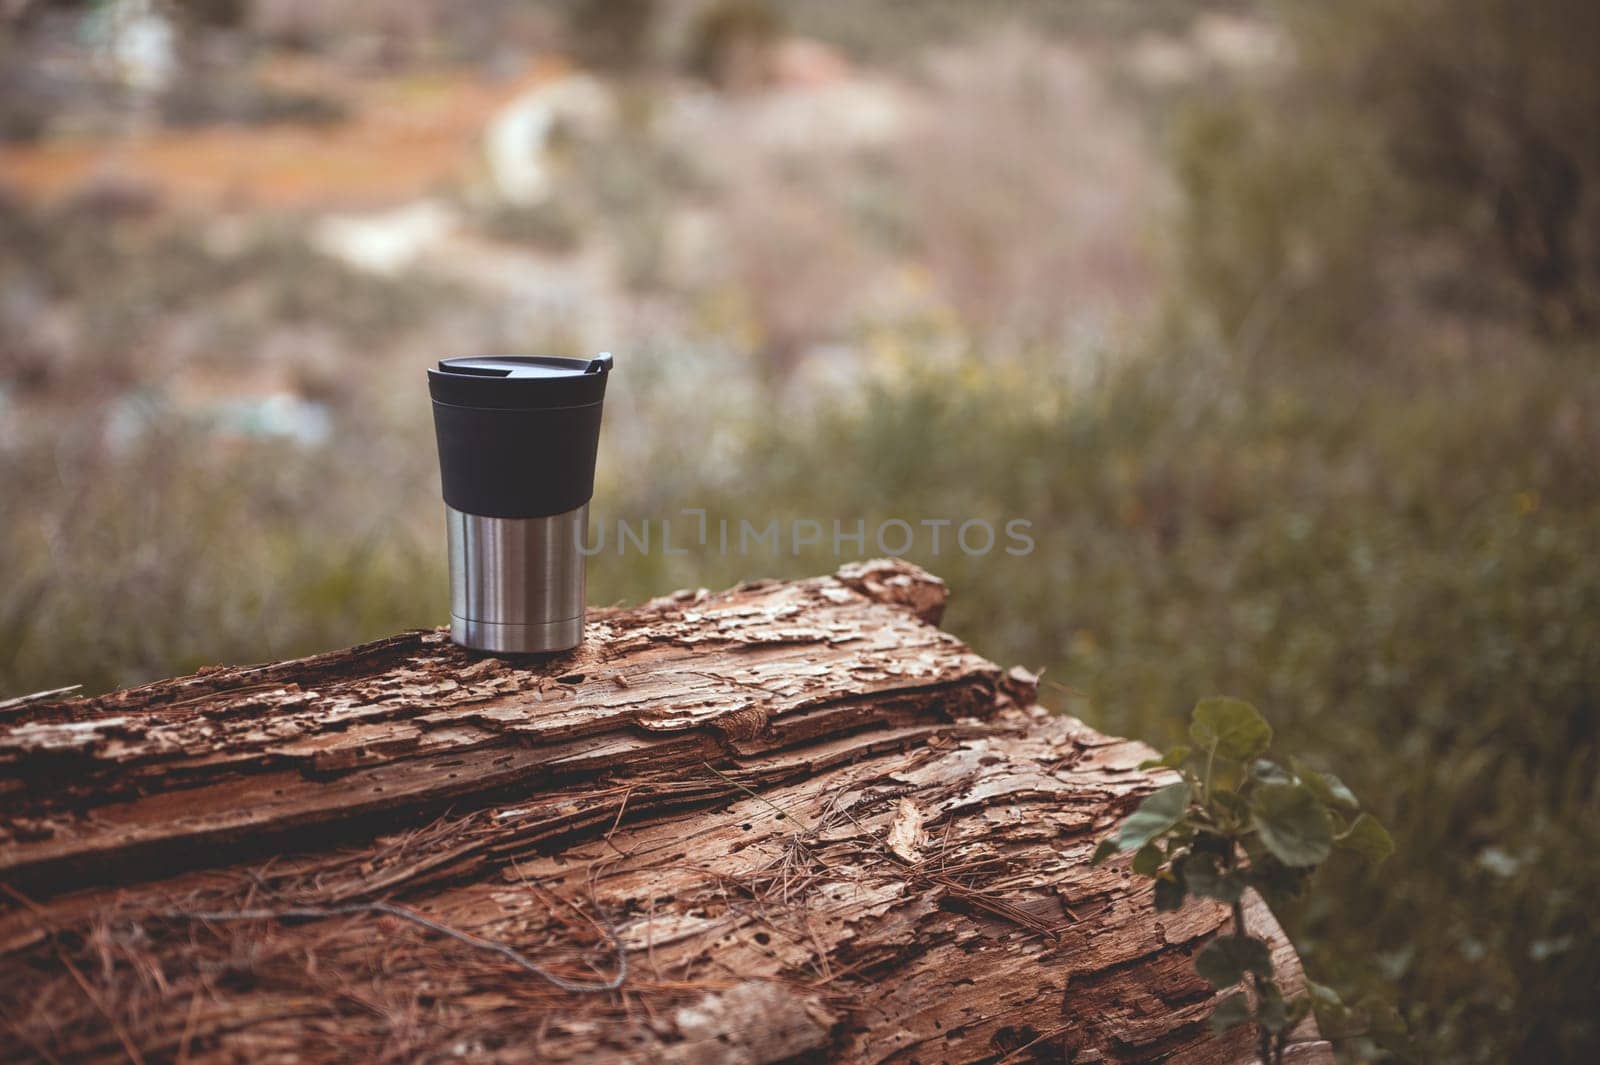 Still life with a stainless steel travel thermos mug on the log over beautiful early spring nature background. A mug of hot tea or coffee drink for enjoying scenery in nature. Trekking and wanderlust